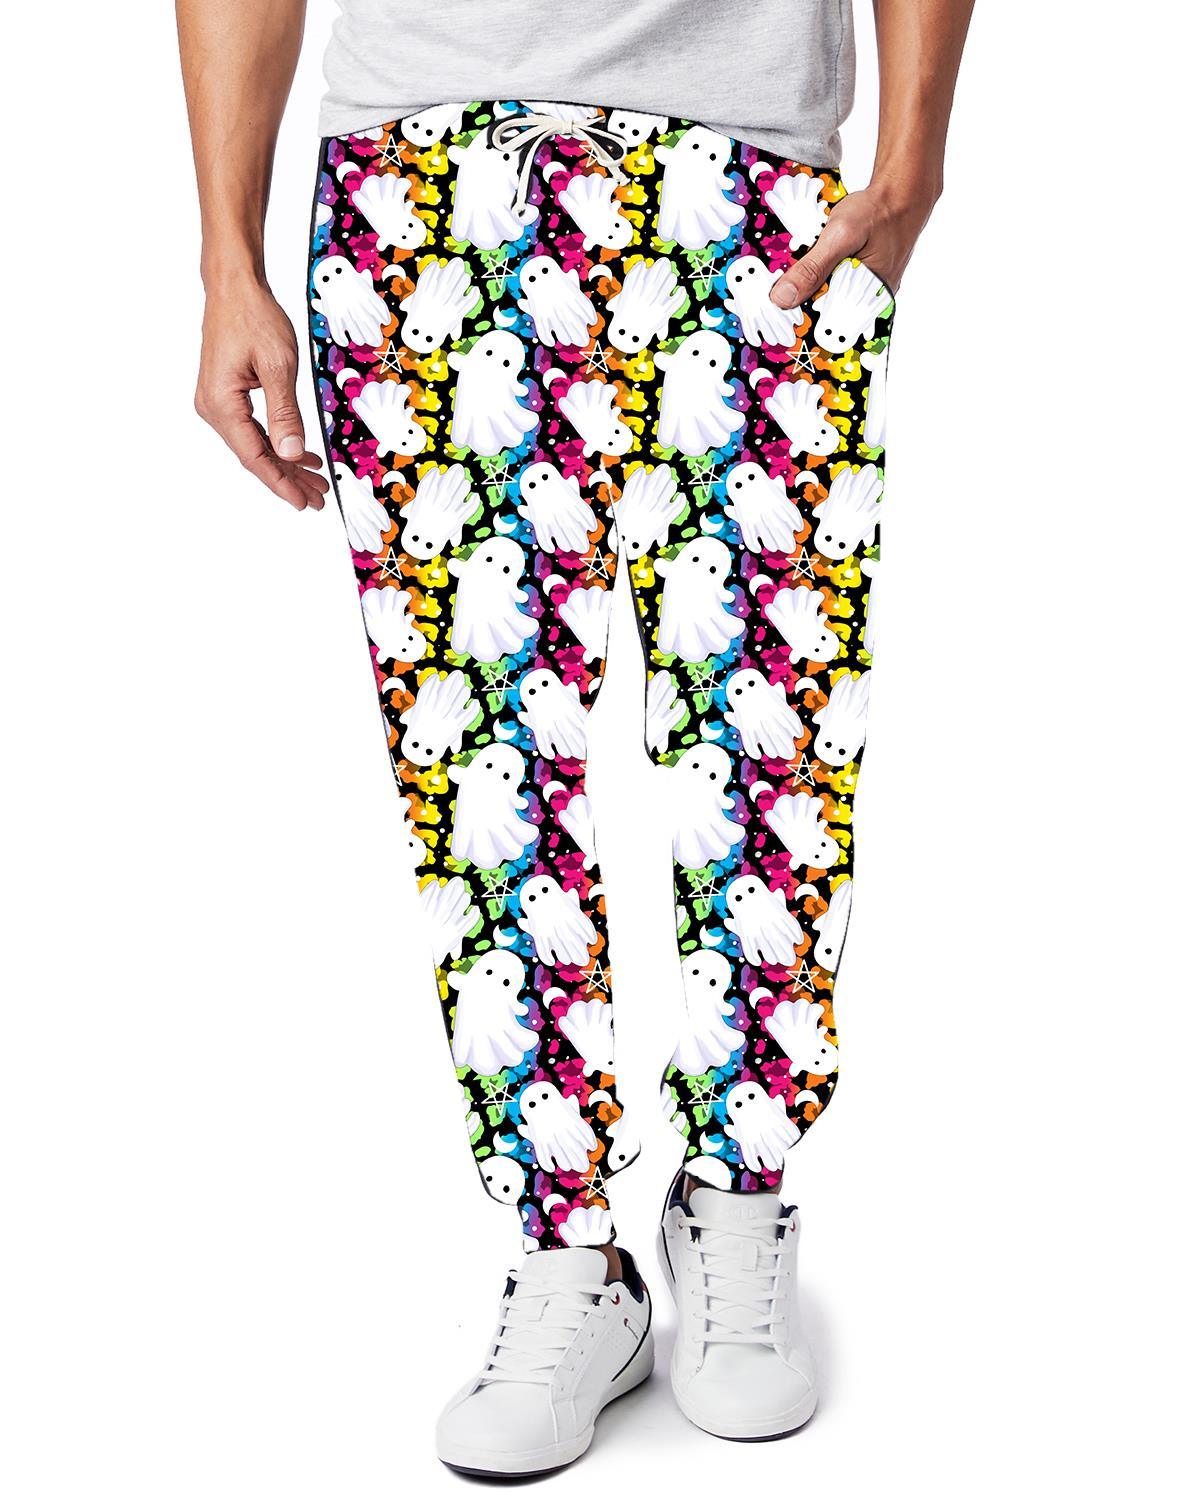 SPOOKY LF RUN-GHOSTS POCKET LEGGINGS AND JOGGERS